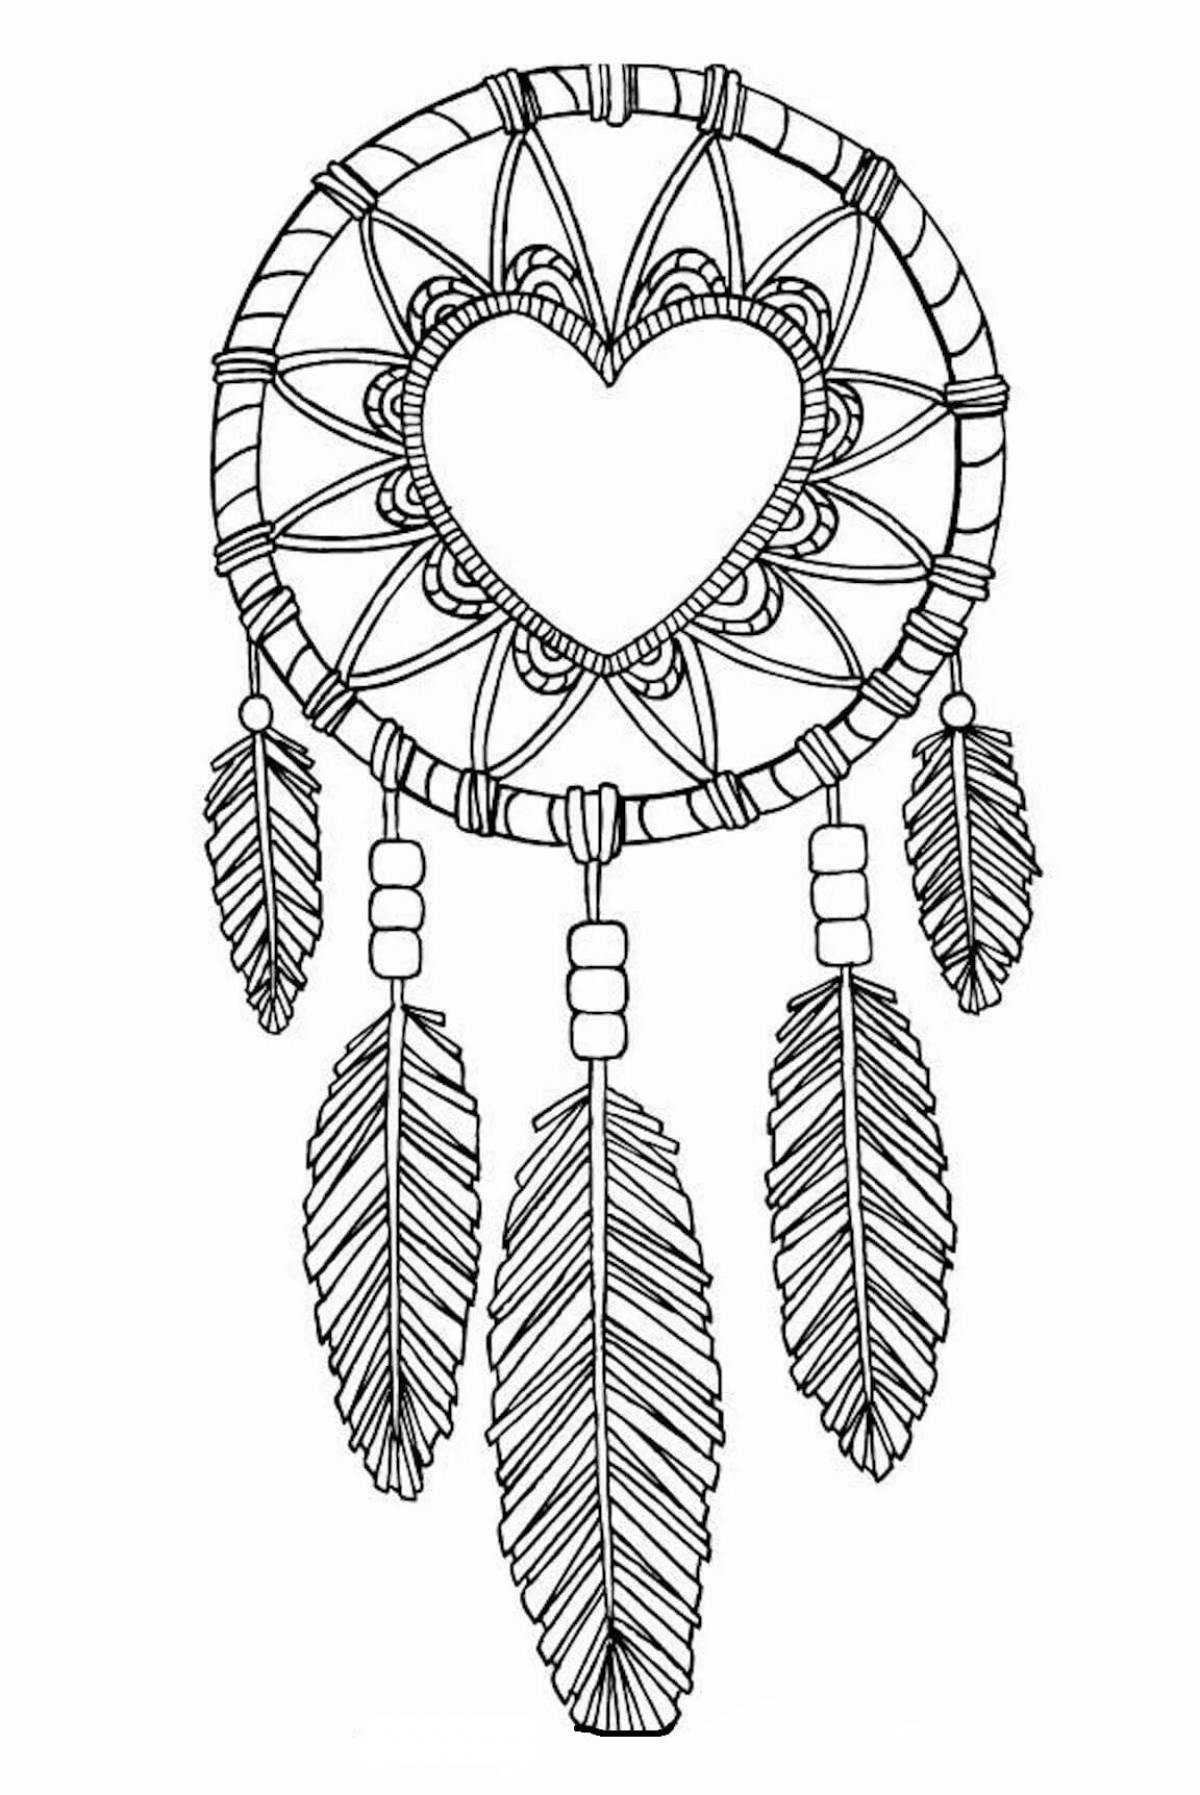 Blissful coloring antistress dream catcher